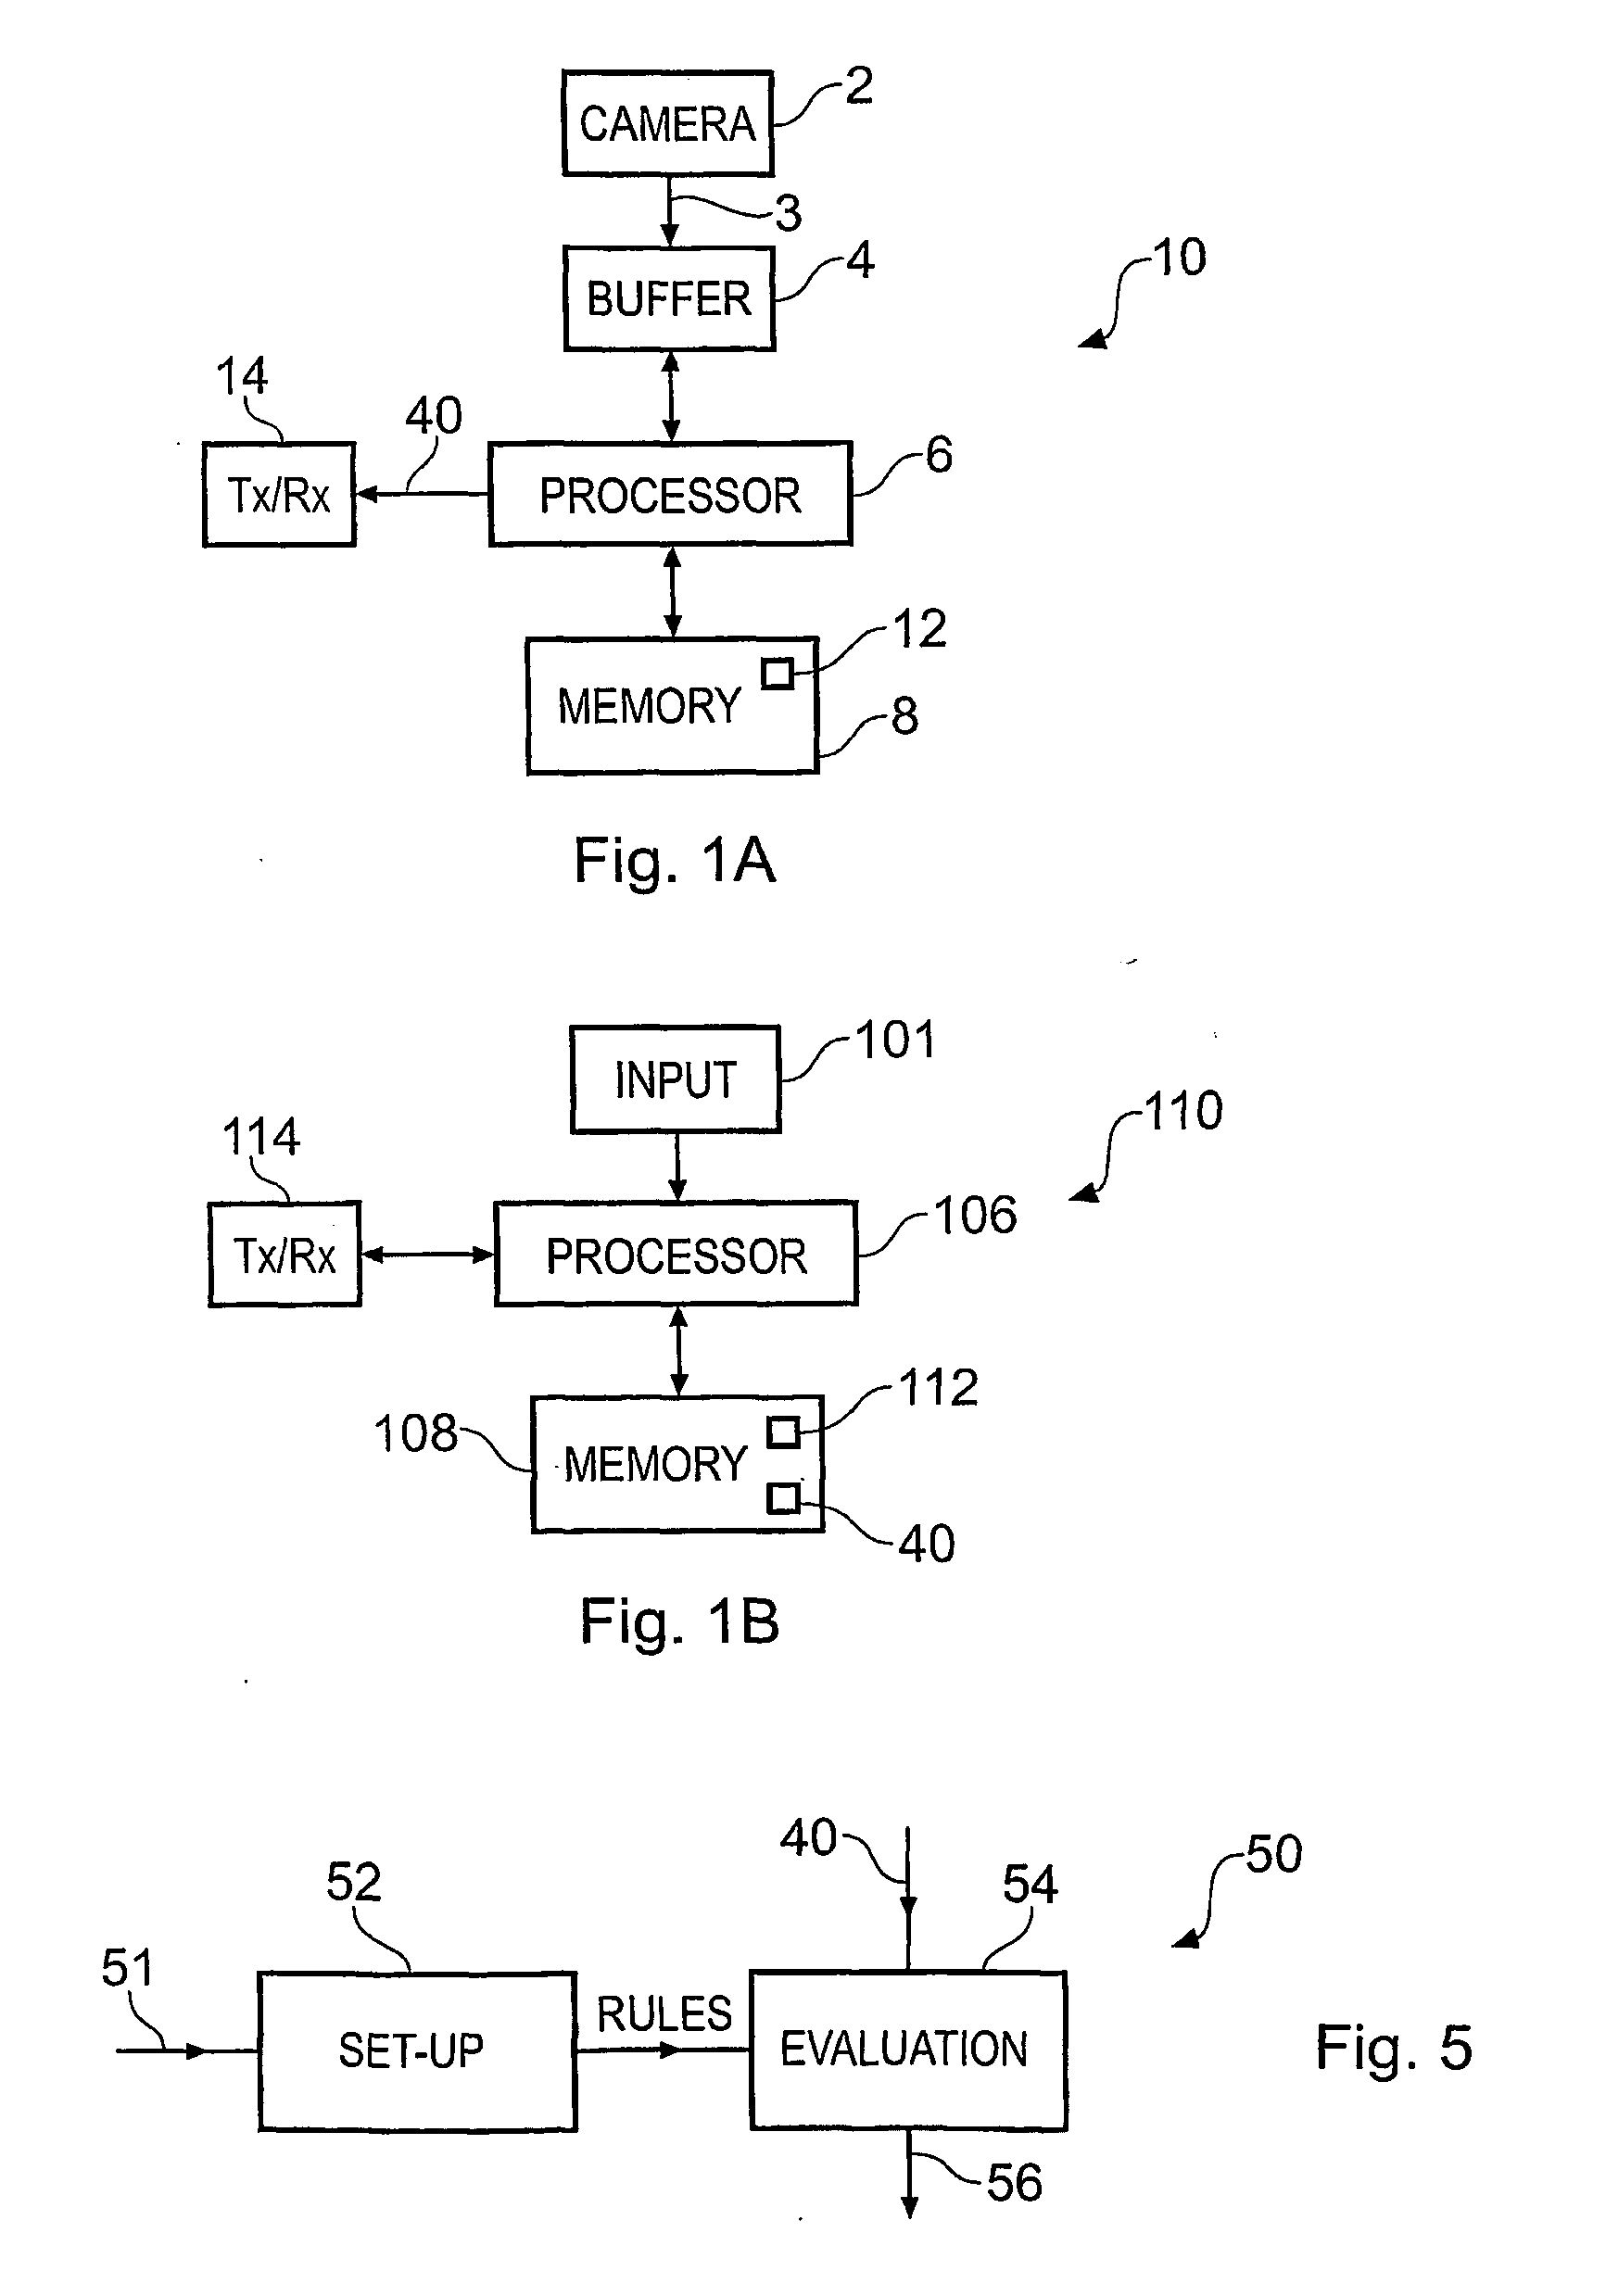 Method for Automatically Characterizing the Behavior of One or More Objects